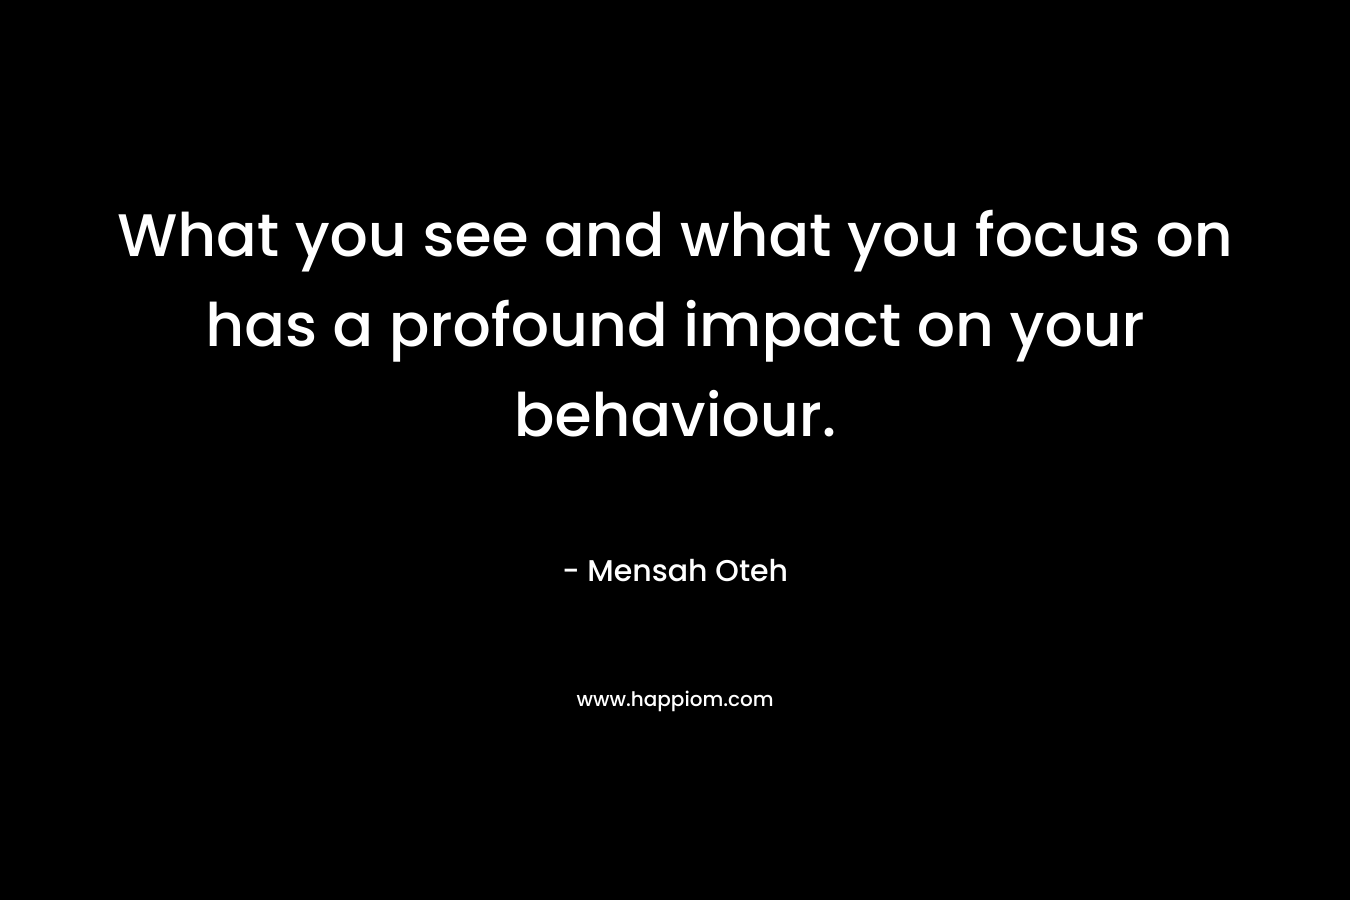 What you see and what you focus on has a profound impact on your behaviour.